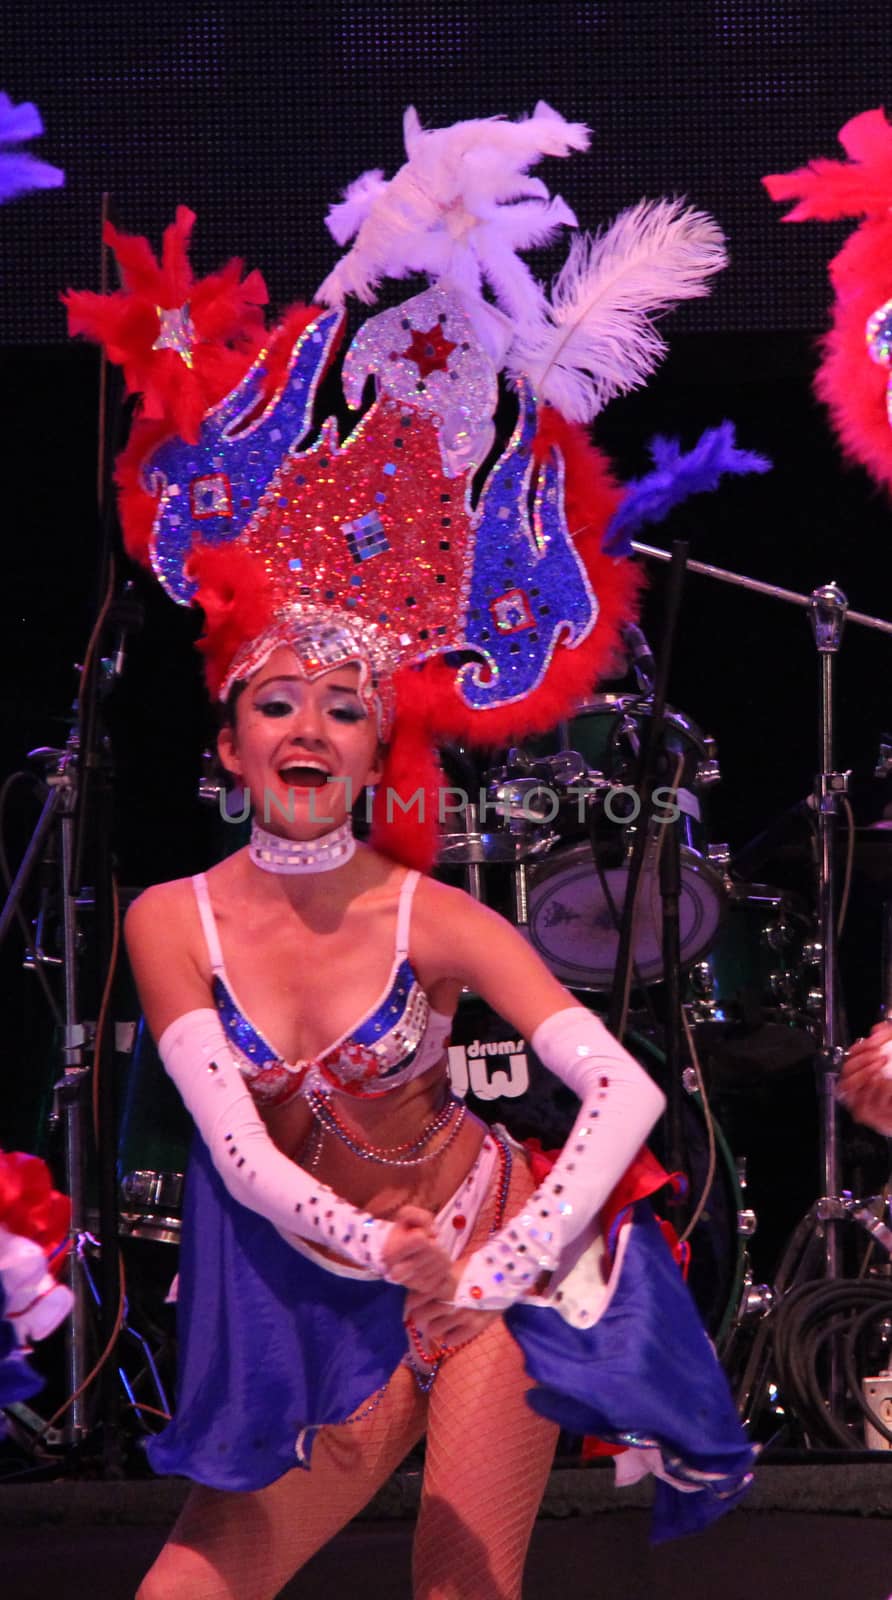 Entertainers performing on stage at a carnaval in Playa del Carmen, Mexico
10 Feb 2013
No model release
Editorial only